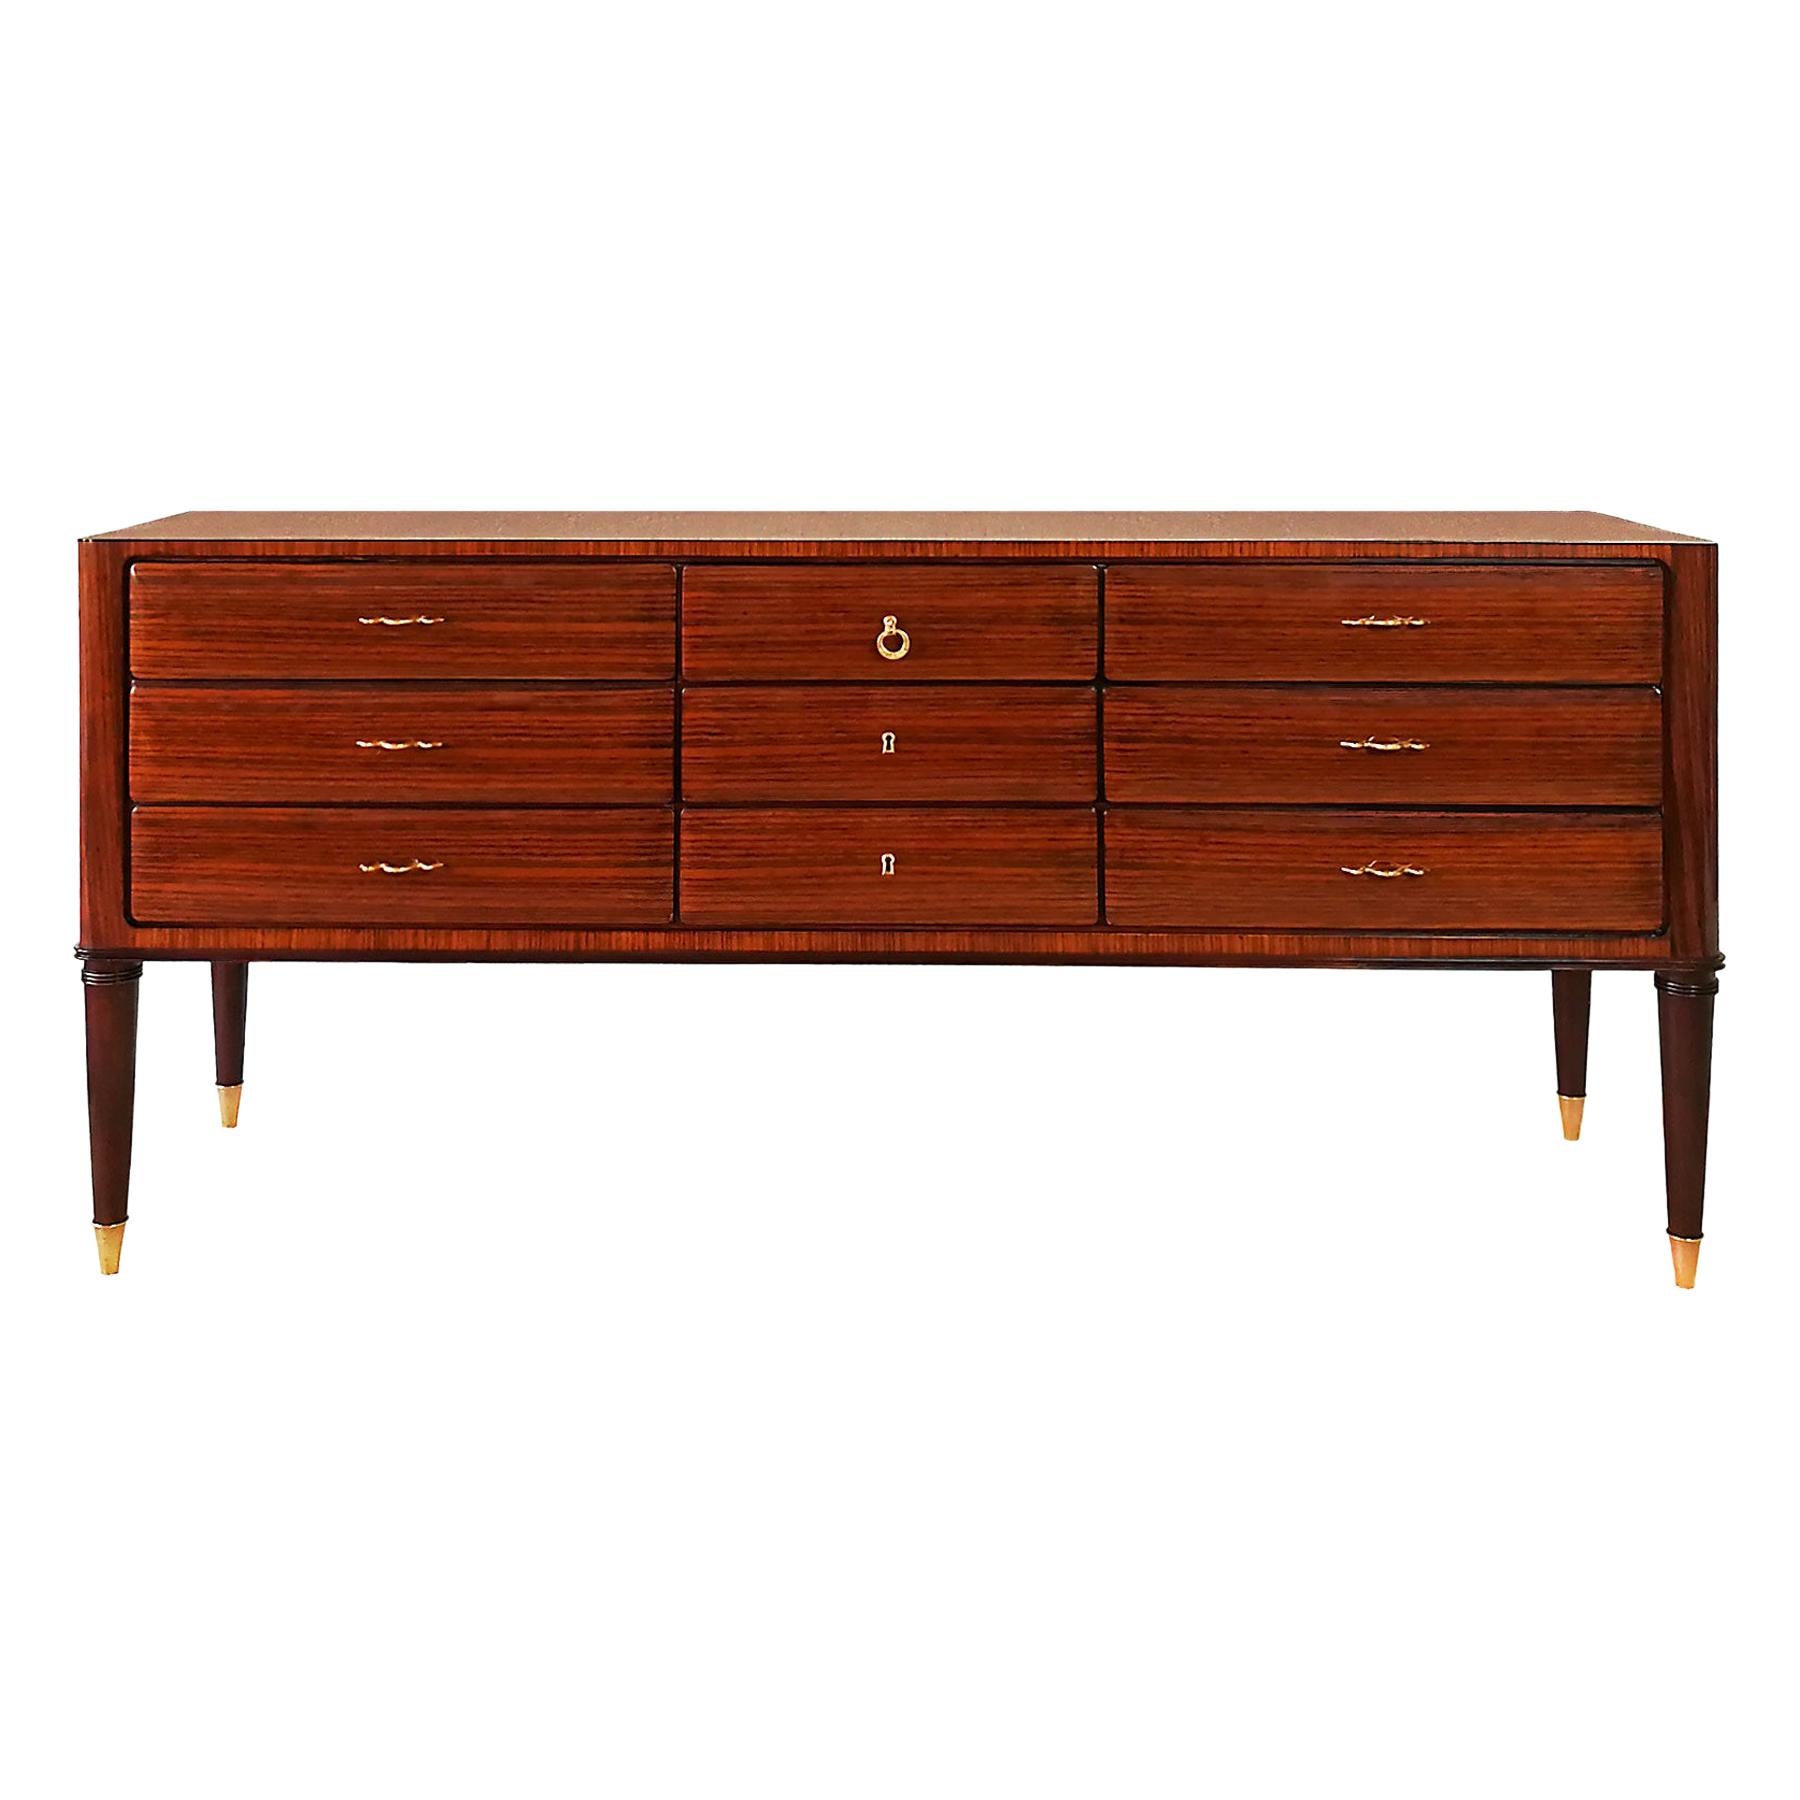 Large Mid-Century Modern Commode in Zebra Wood, Mahogany and Brass - Italy